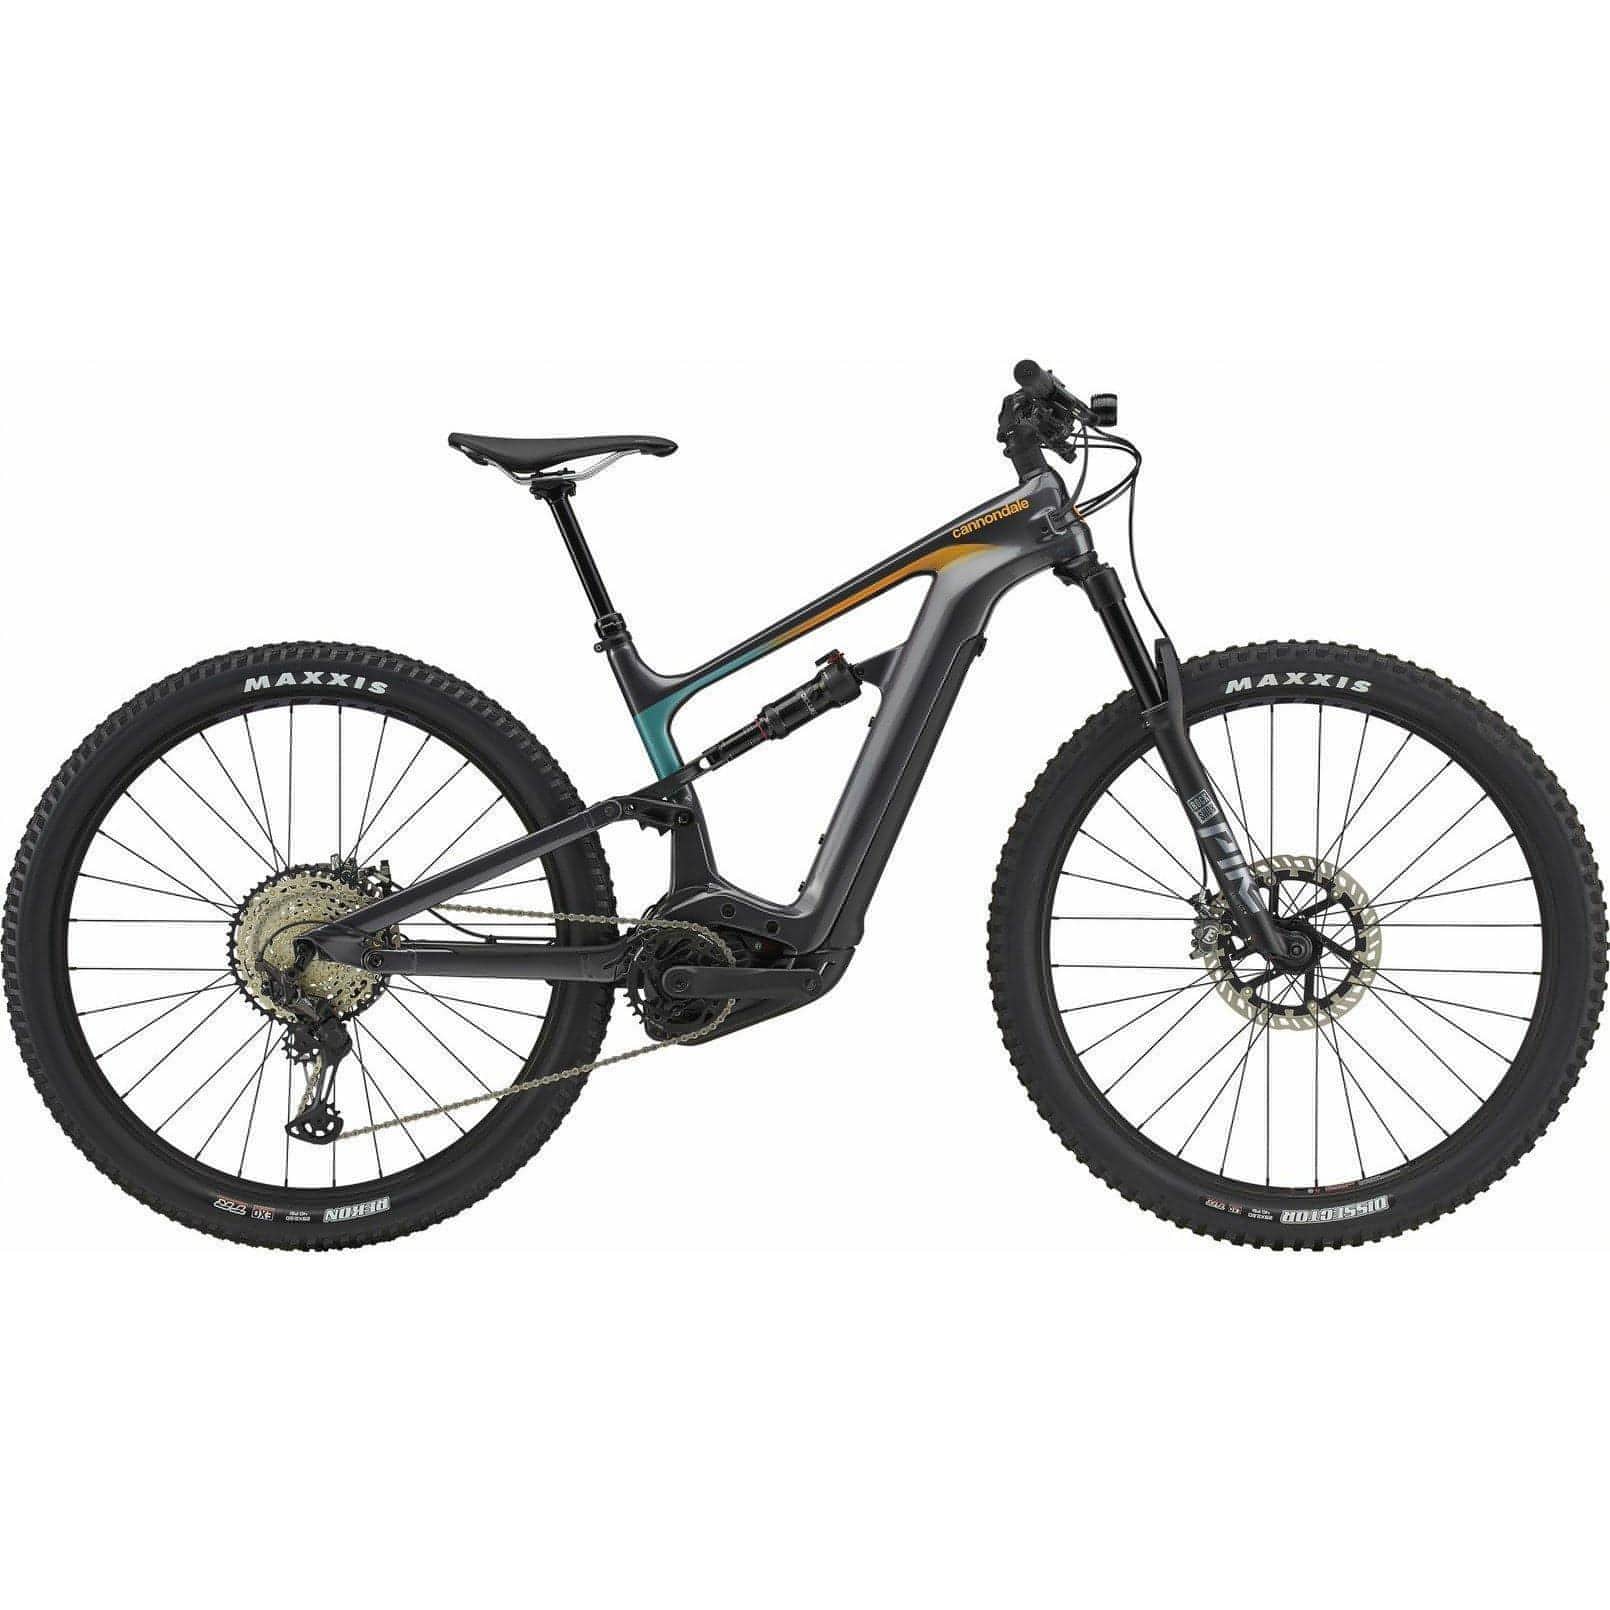 Cannondale Habit 1 Neo Carbon Electric Mountain Bike 2021 - Grey 884603843901 - Start Fitness